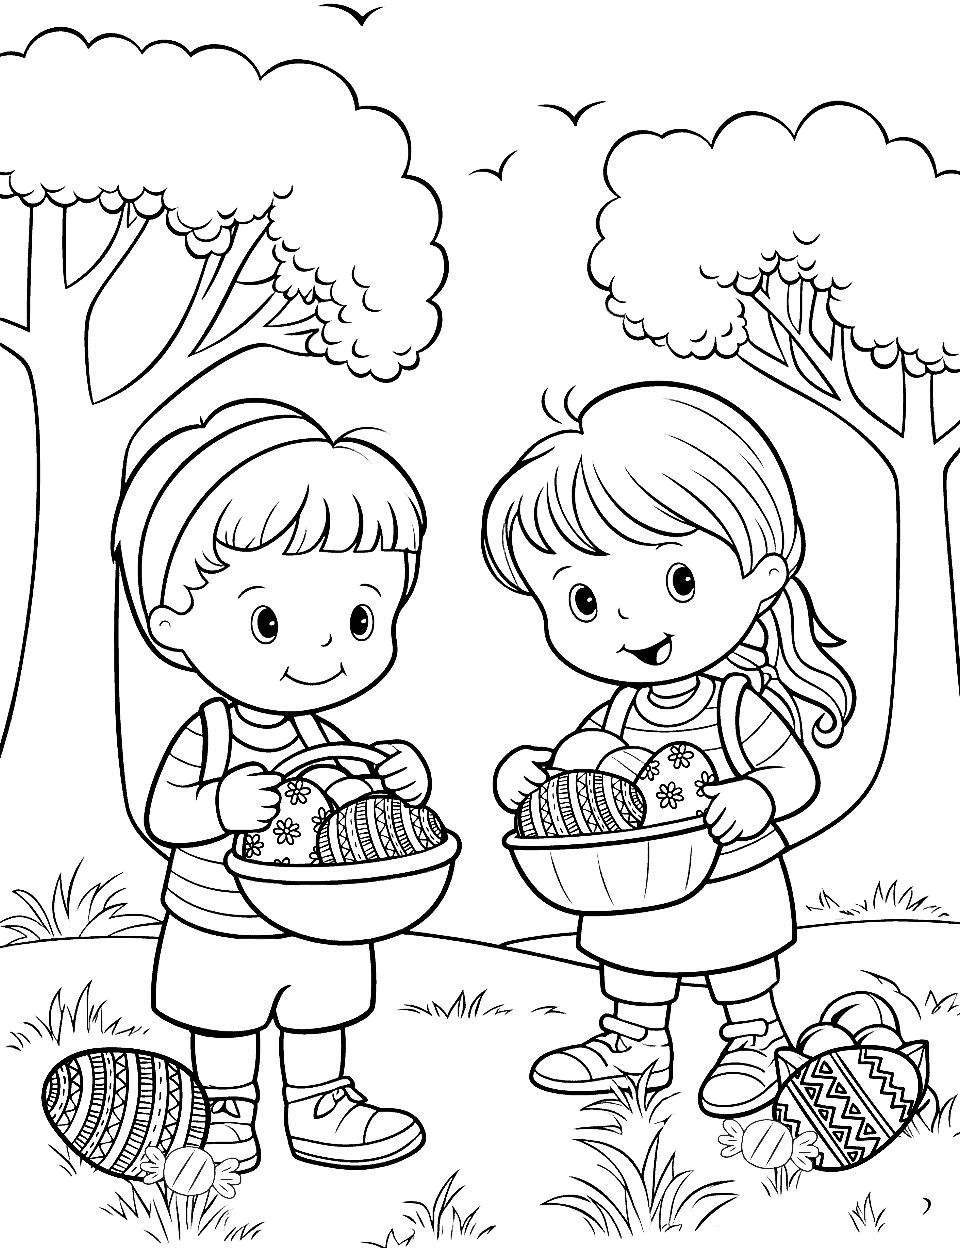 Easter Egg Hunt Candy Coloring Page - Children searching for Easter eggs and candies in a garden.